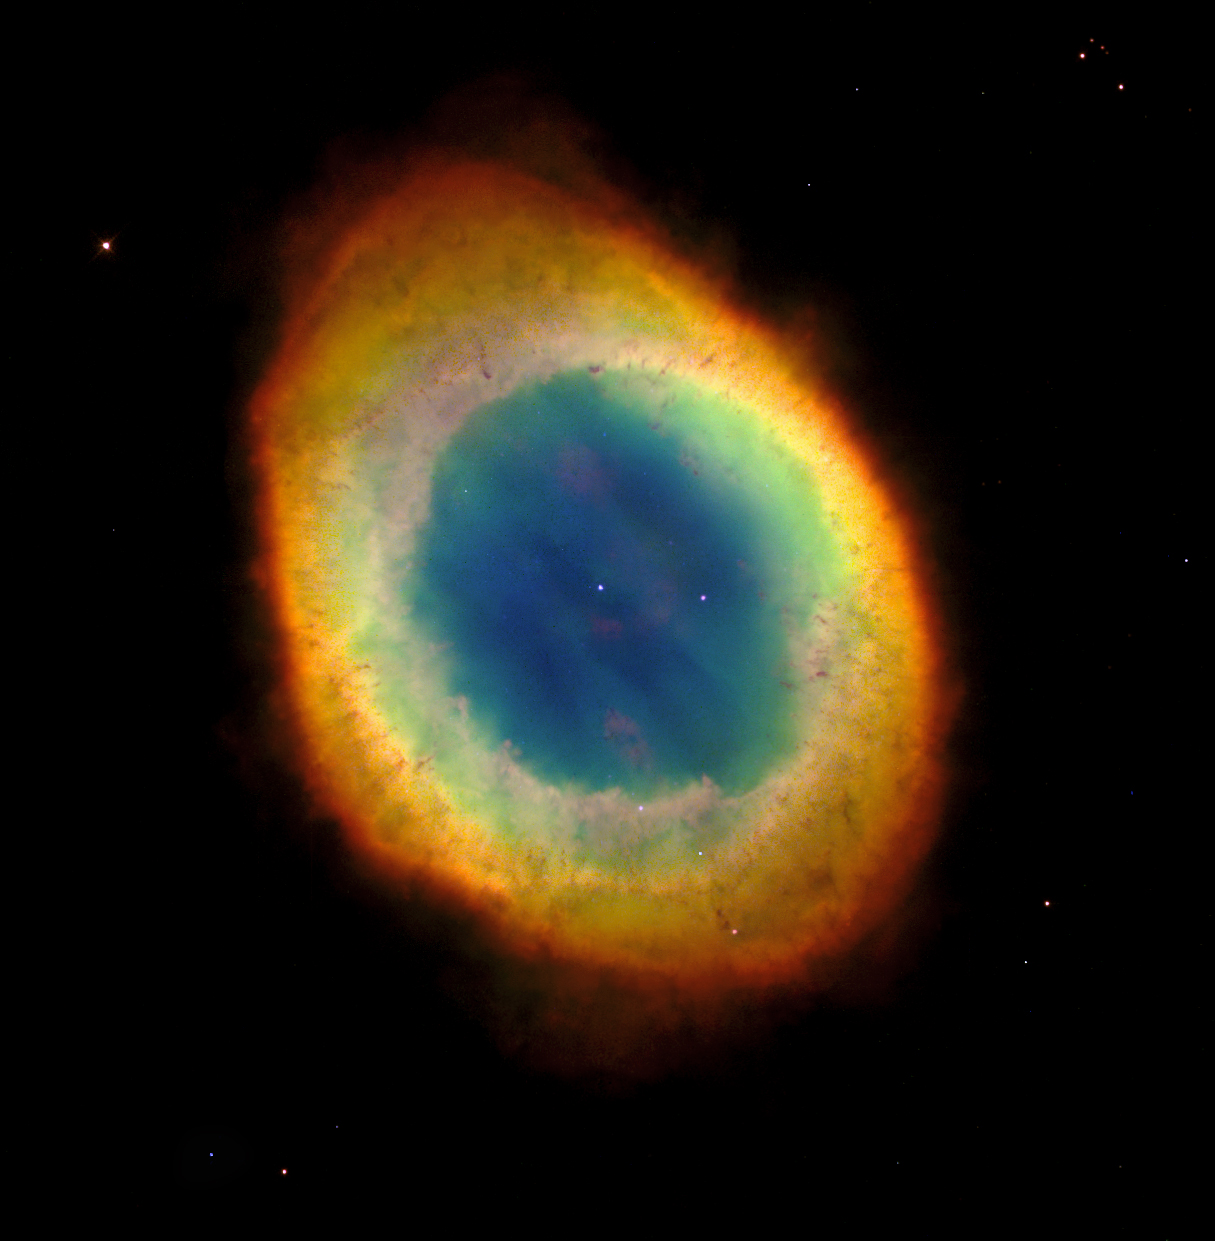 Hubble reveals Ring Nebula's intriguing details